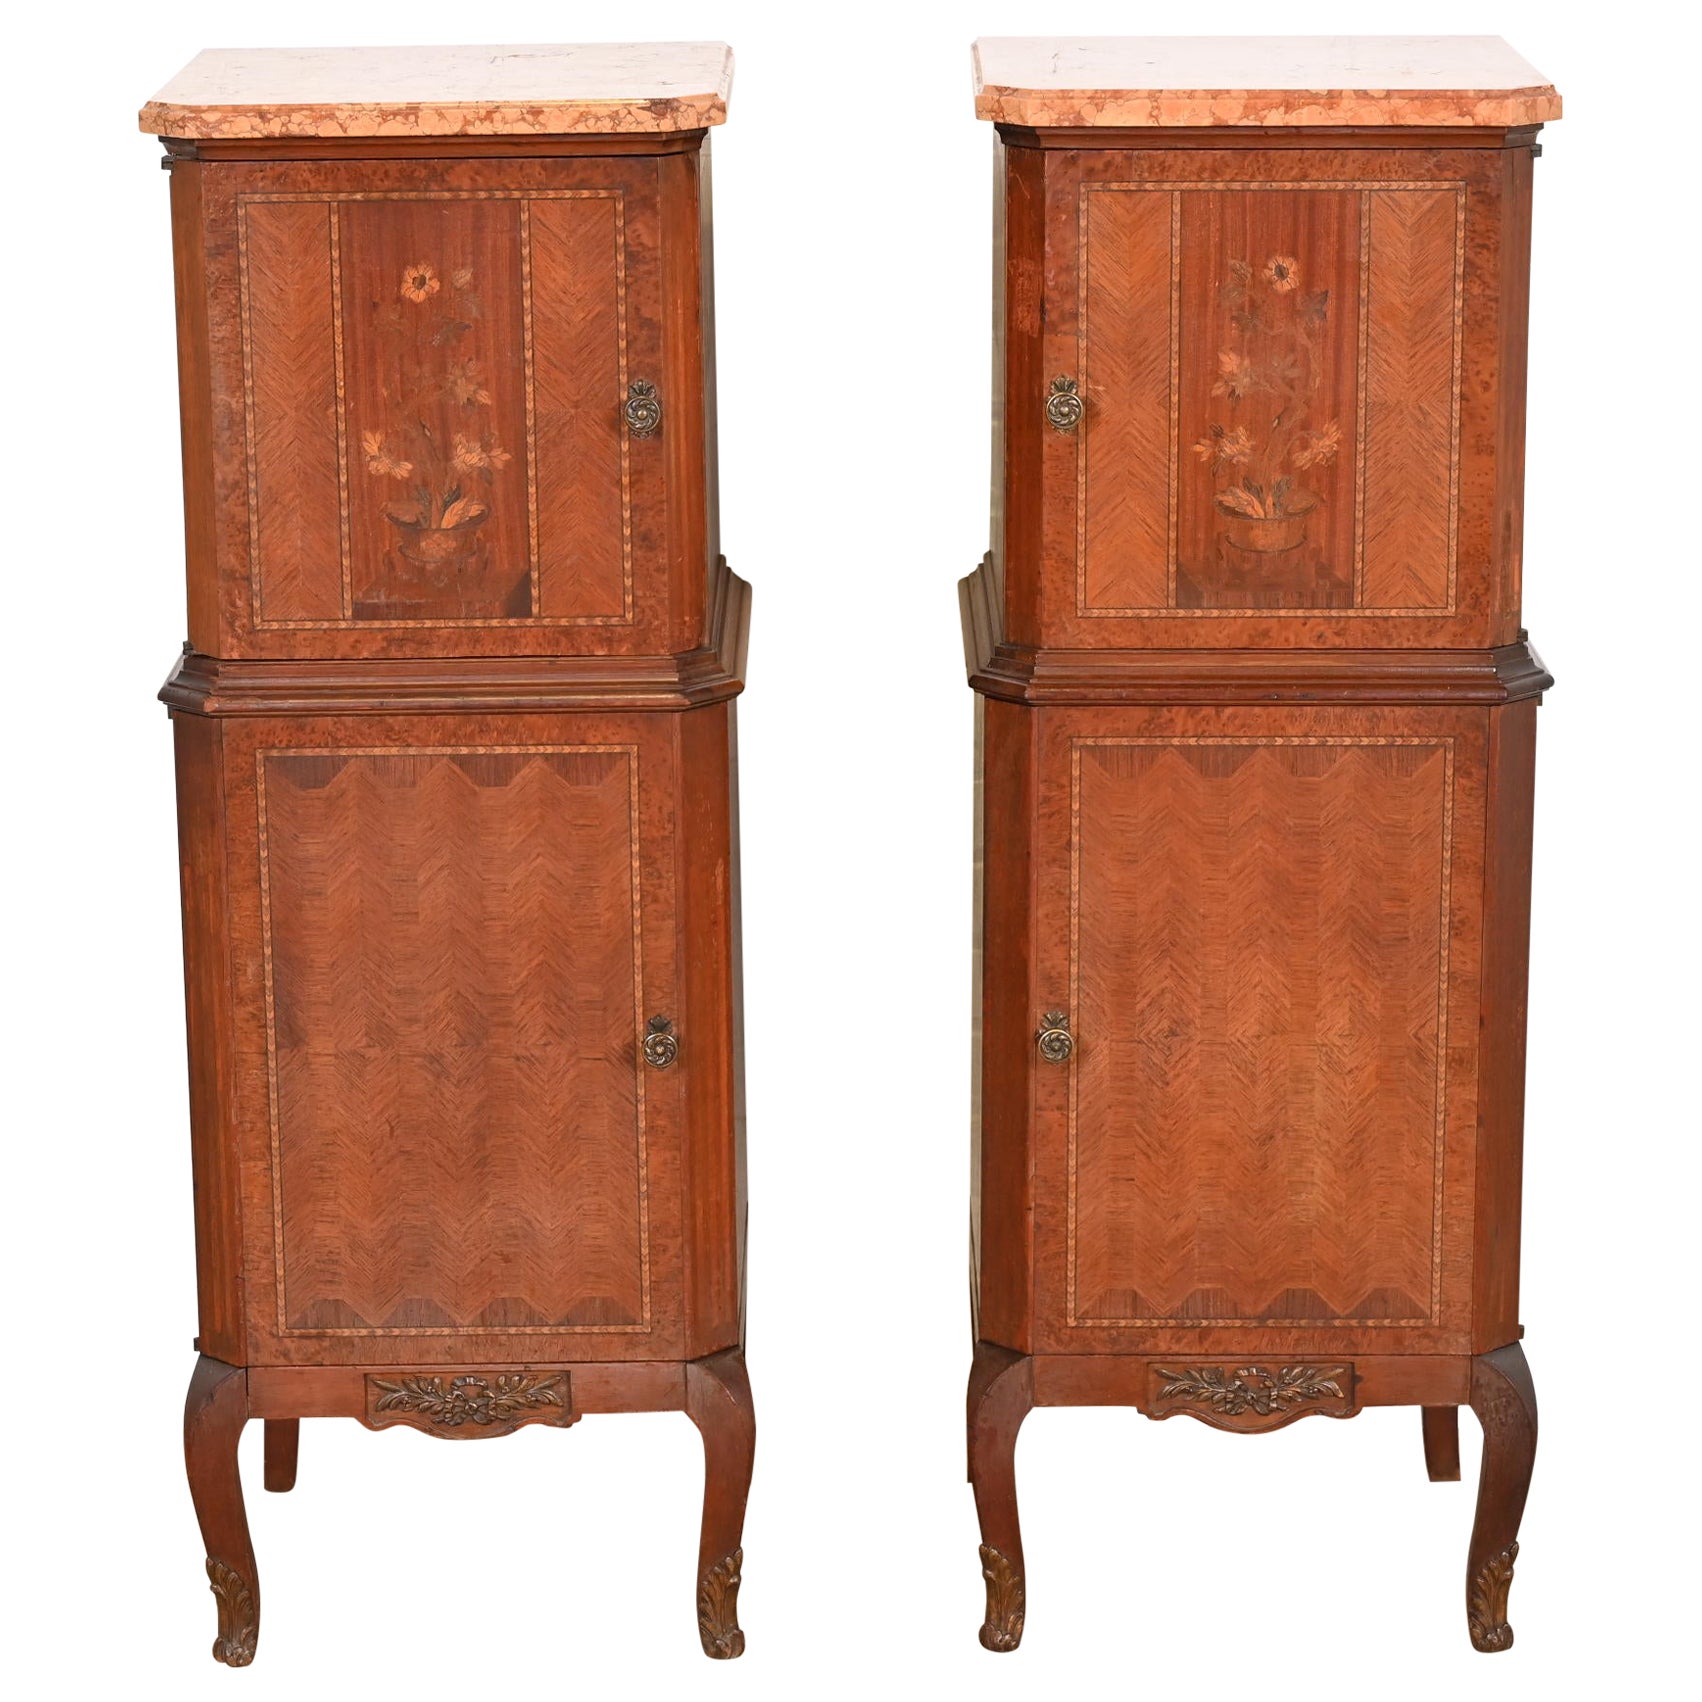 French Louis XV Kingwood Inlaid Marquetry Marble Top Lingerie Chests, Pair For Sale